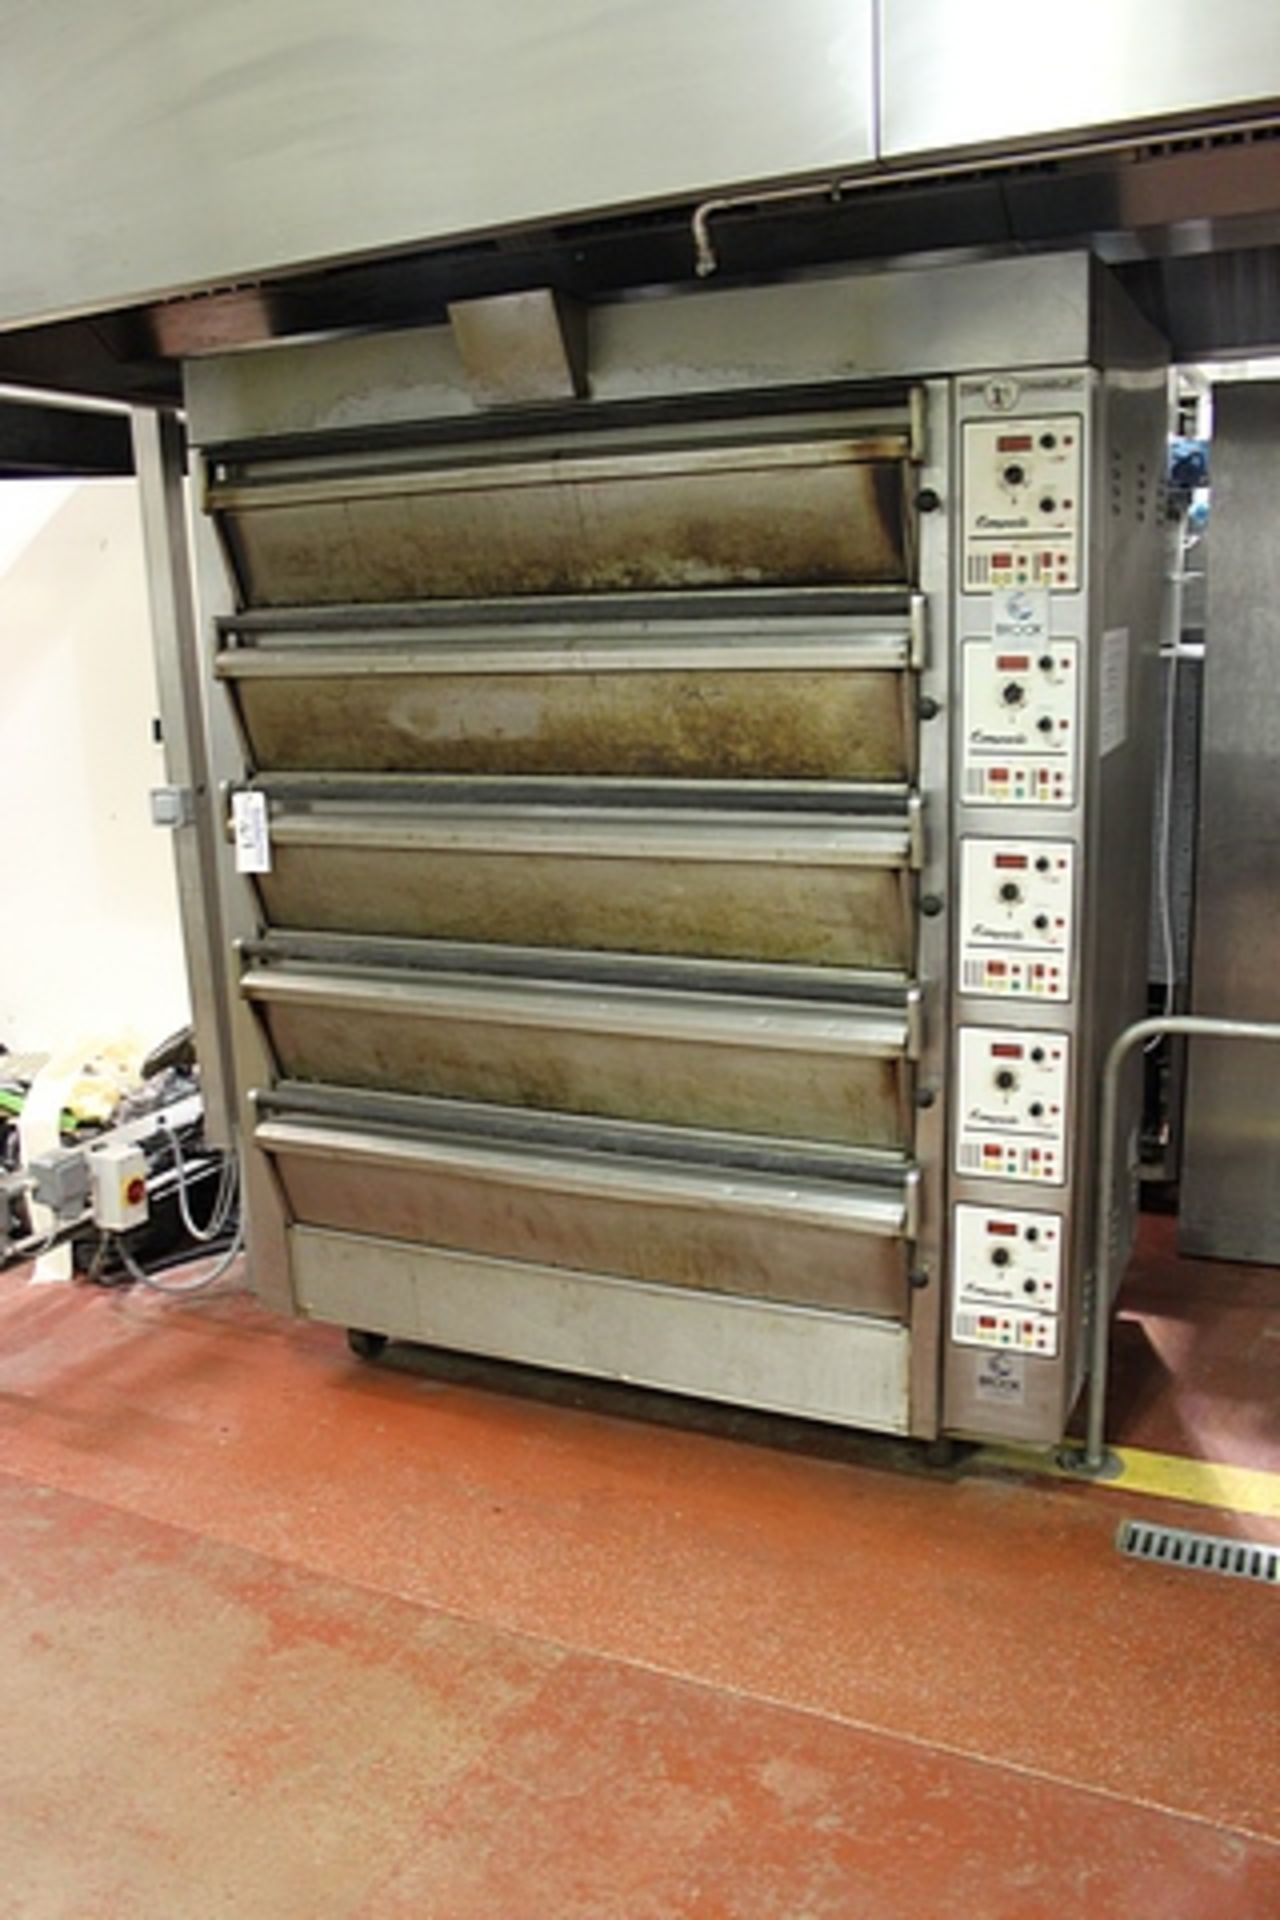 Tom Chandley CPM-K4-MTU-5.3.8H five deck electric high crown oven 37.3Kw (s/n 10813) - Image 3 of 3